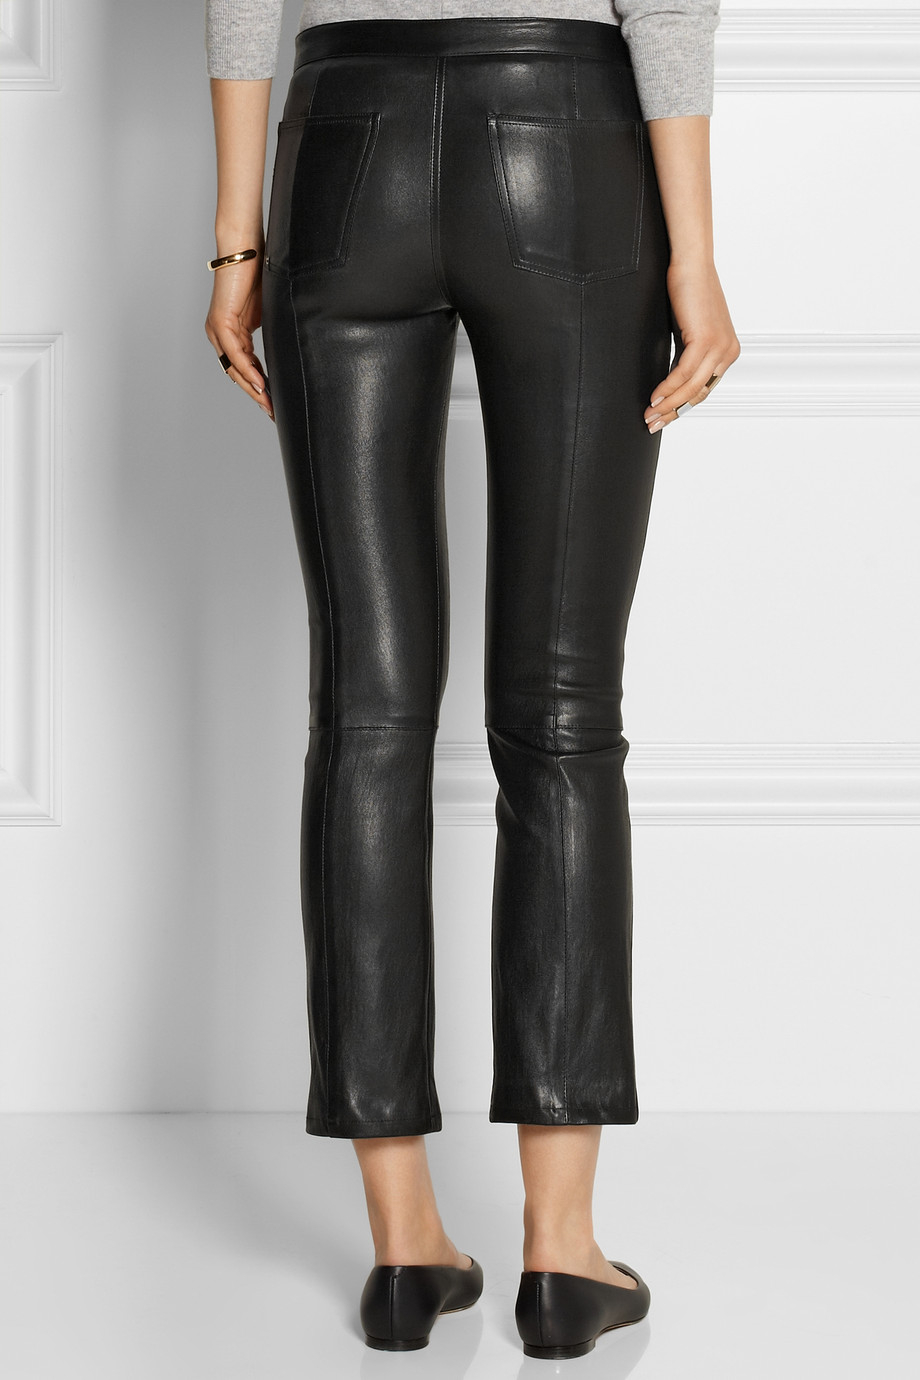 The Row Landly Cropped Stretch-Leather Straight-Leg Pants in Black - Lyst